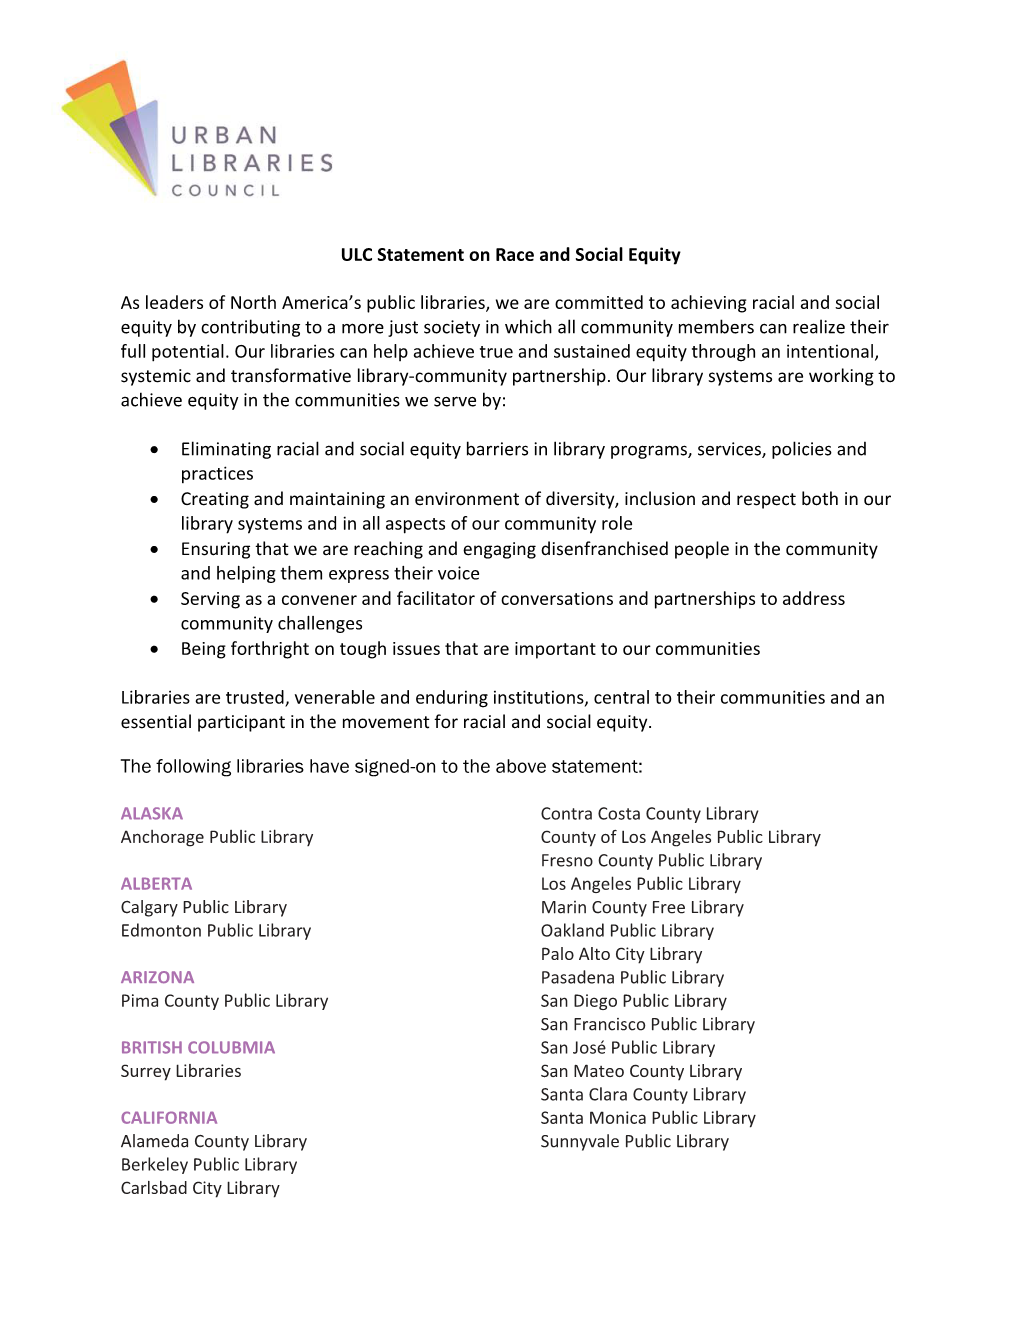 Urban Libraries Council Statement on Race and Social Equity